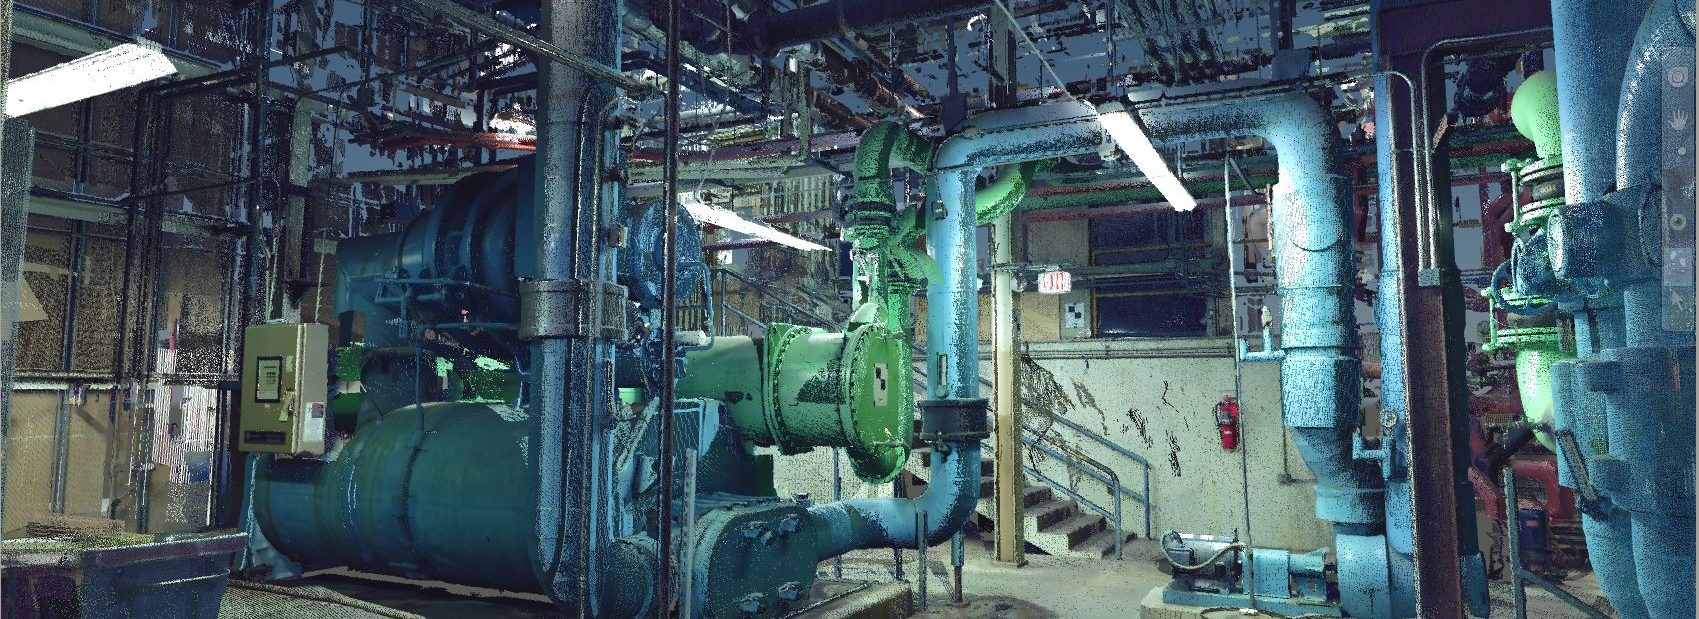 Laser scan point cloud of mechanical room